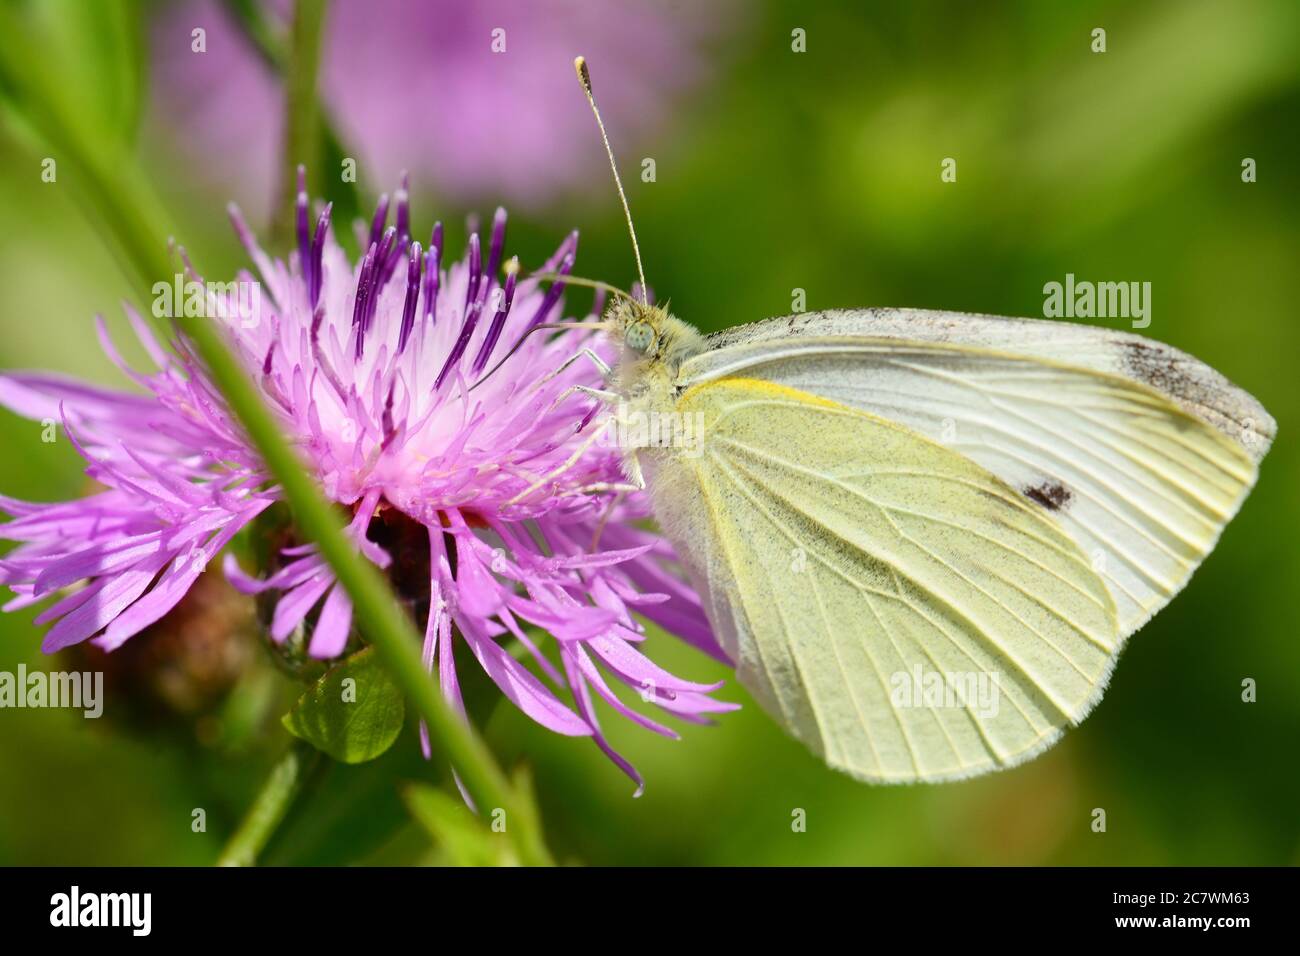 White butterfly drink nectar from a pink flower Stock Photo